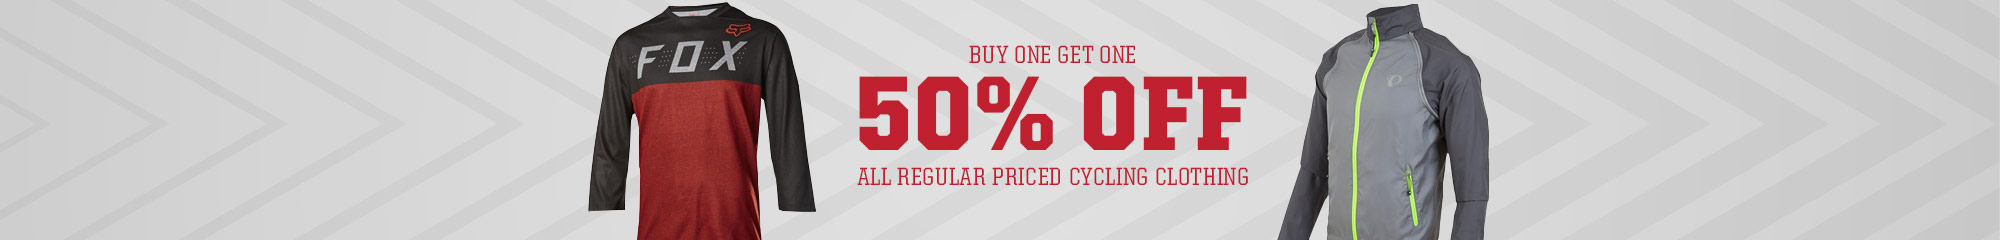 Bogo 50% Off All Regular Priced Cycling Clothing